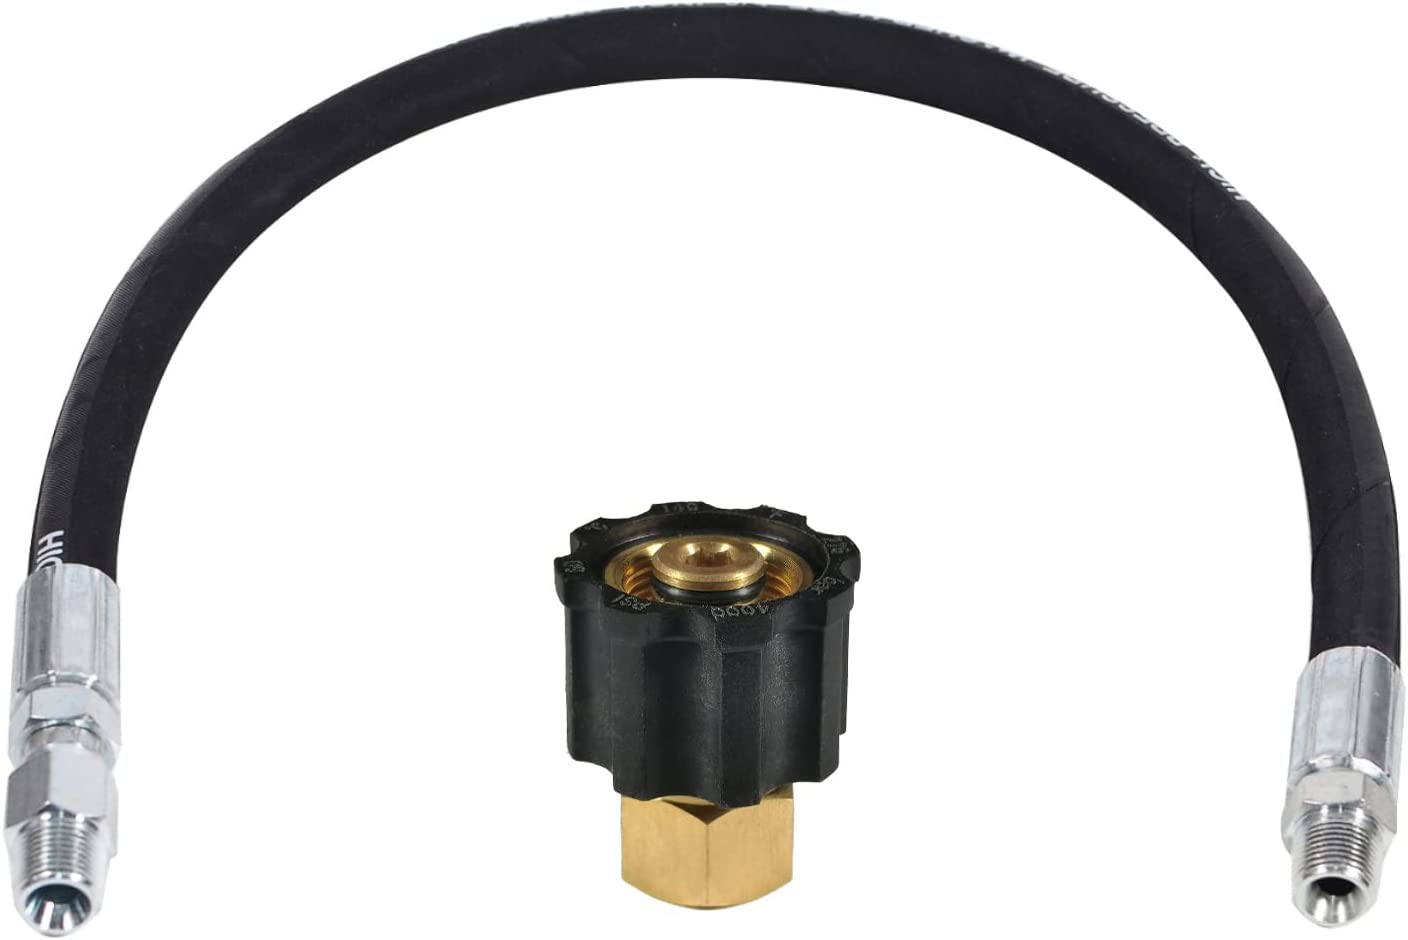 Hose Reel Connector Hose for Pressure Washing – YAMATIC®